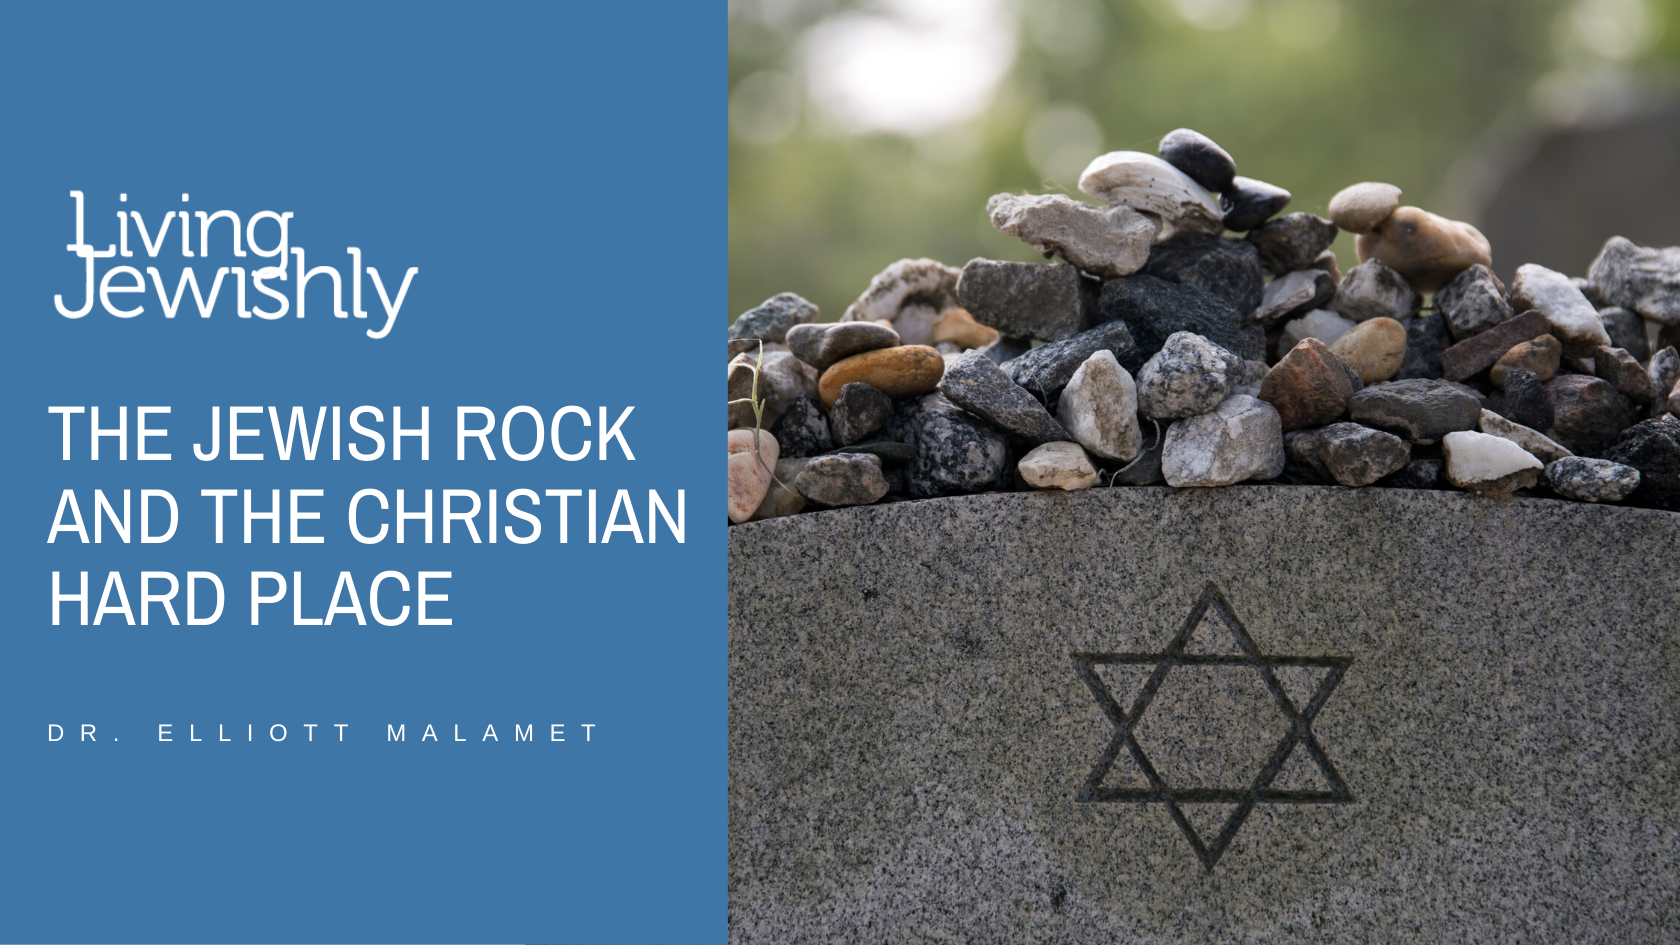 The Jewish Rock and the Christian Hard Place